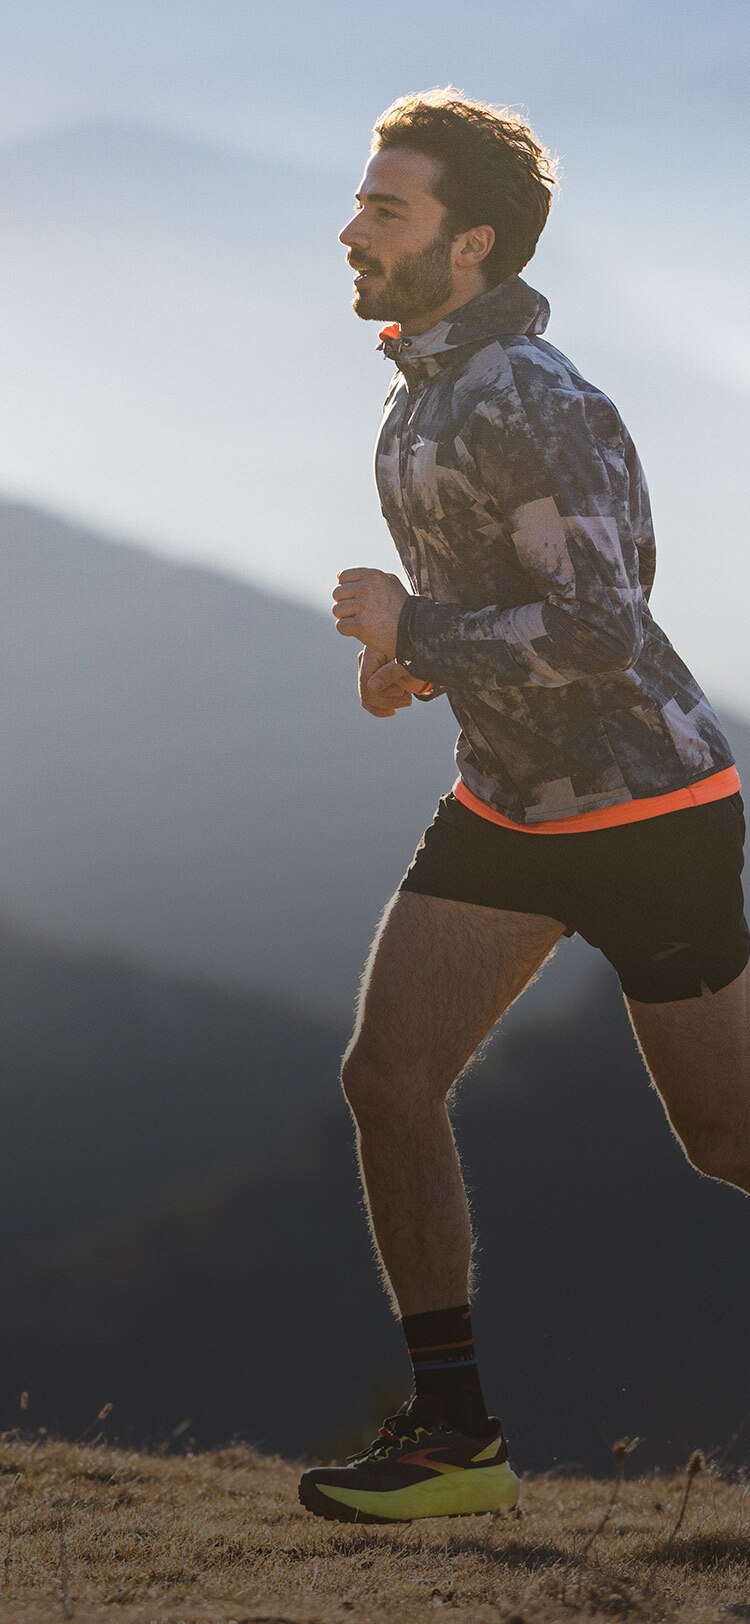 Models with Brooks clothing running on a trail track